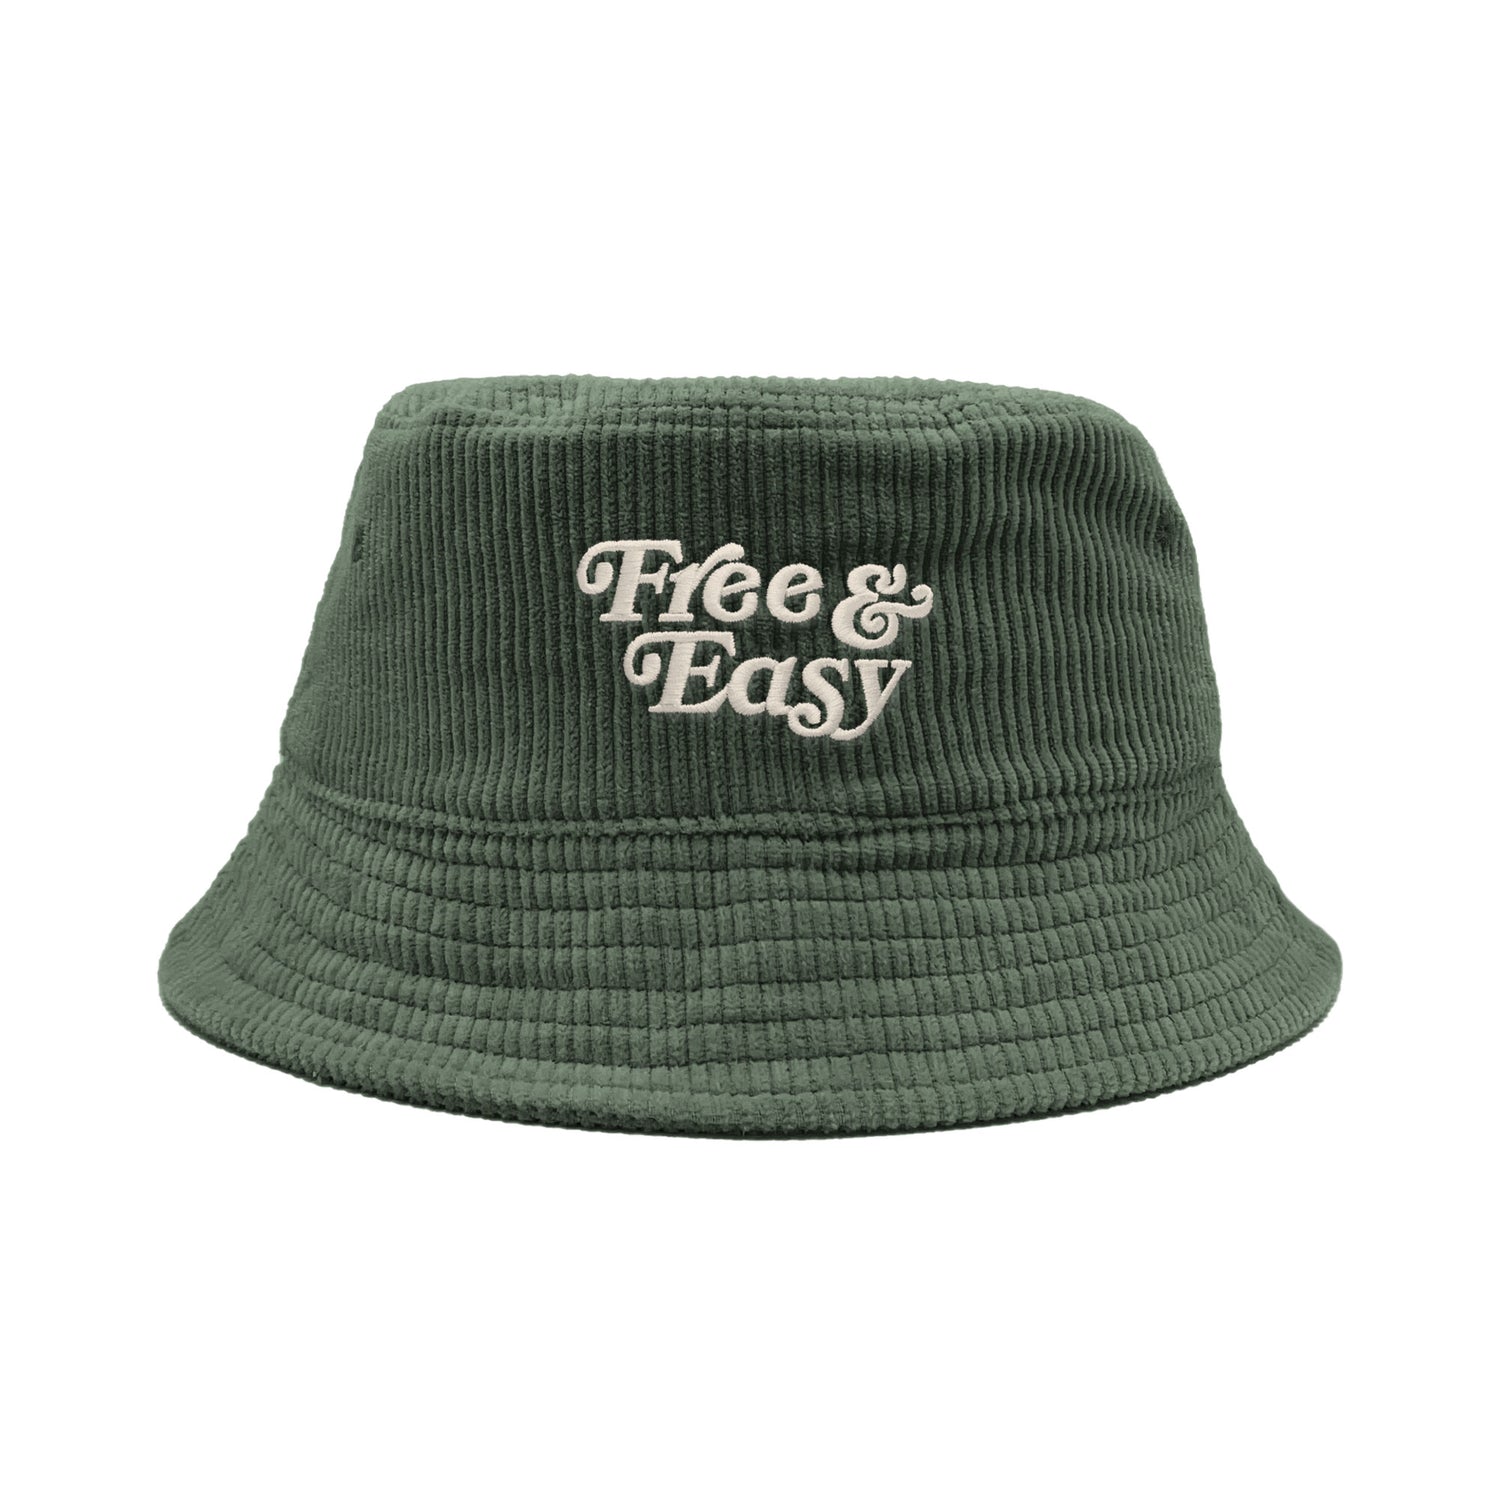 Free & Easy Don't Trip Fat Corduroy Bucket Hat in olive with white Free & Easy embroidery on a white background - Free & Easy